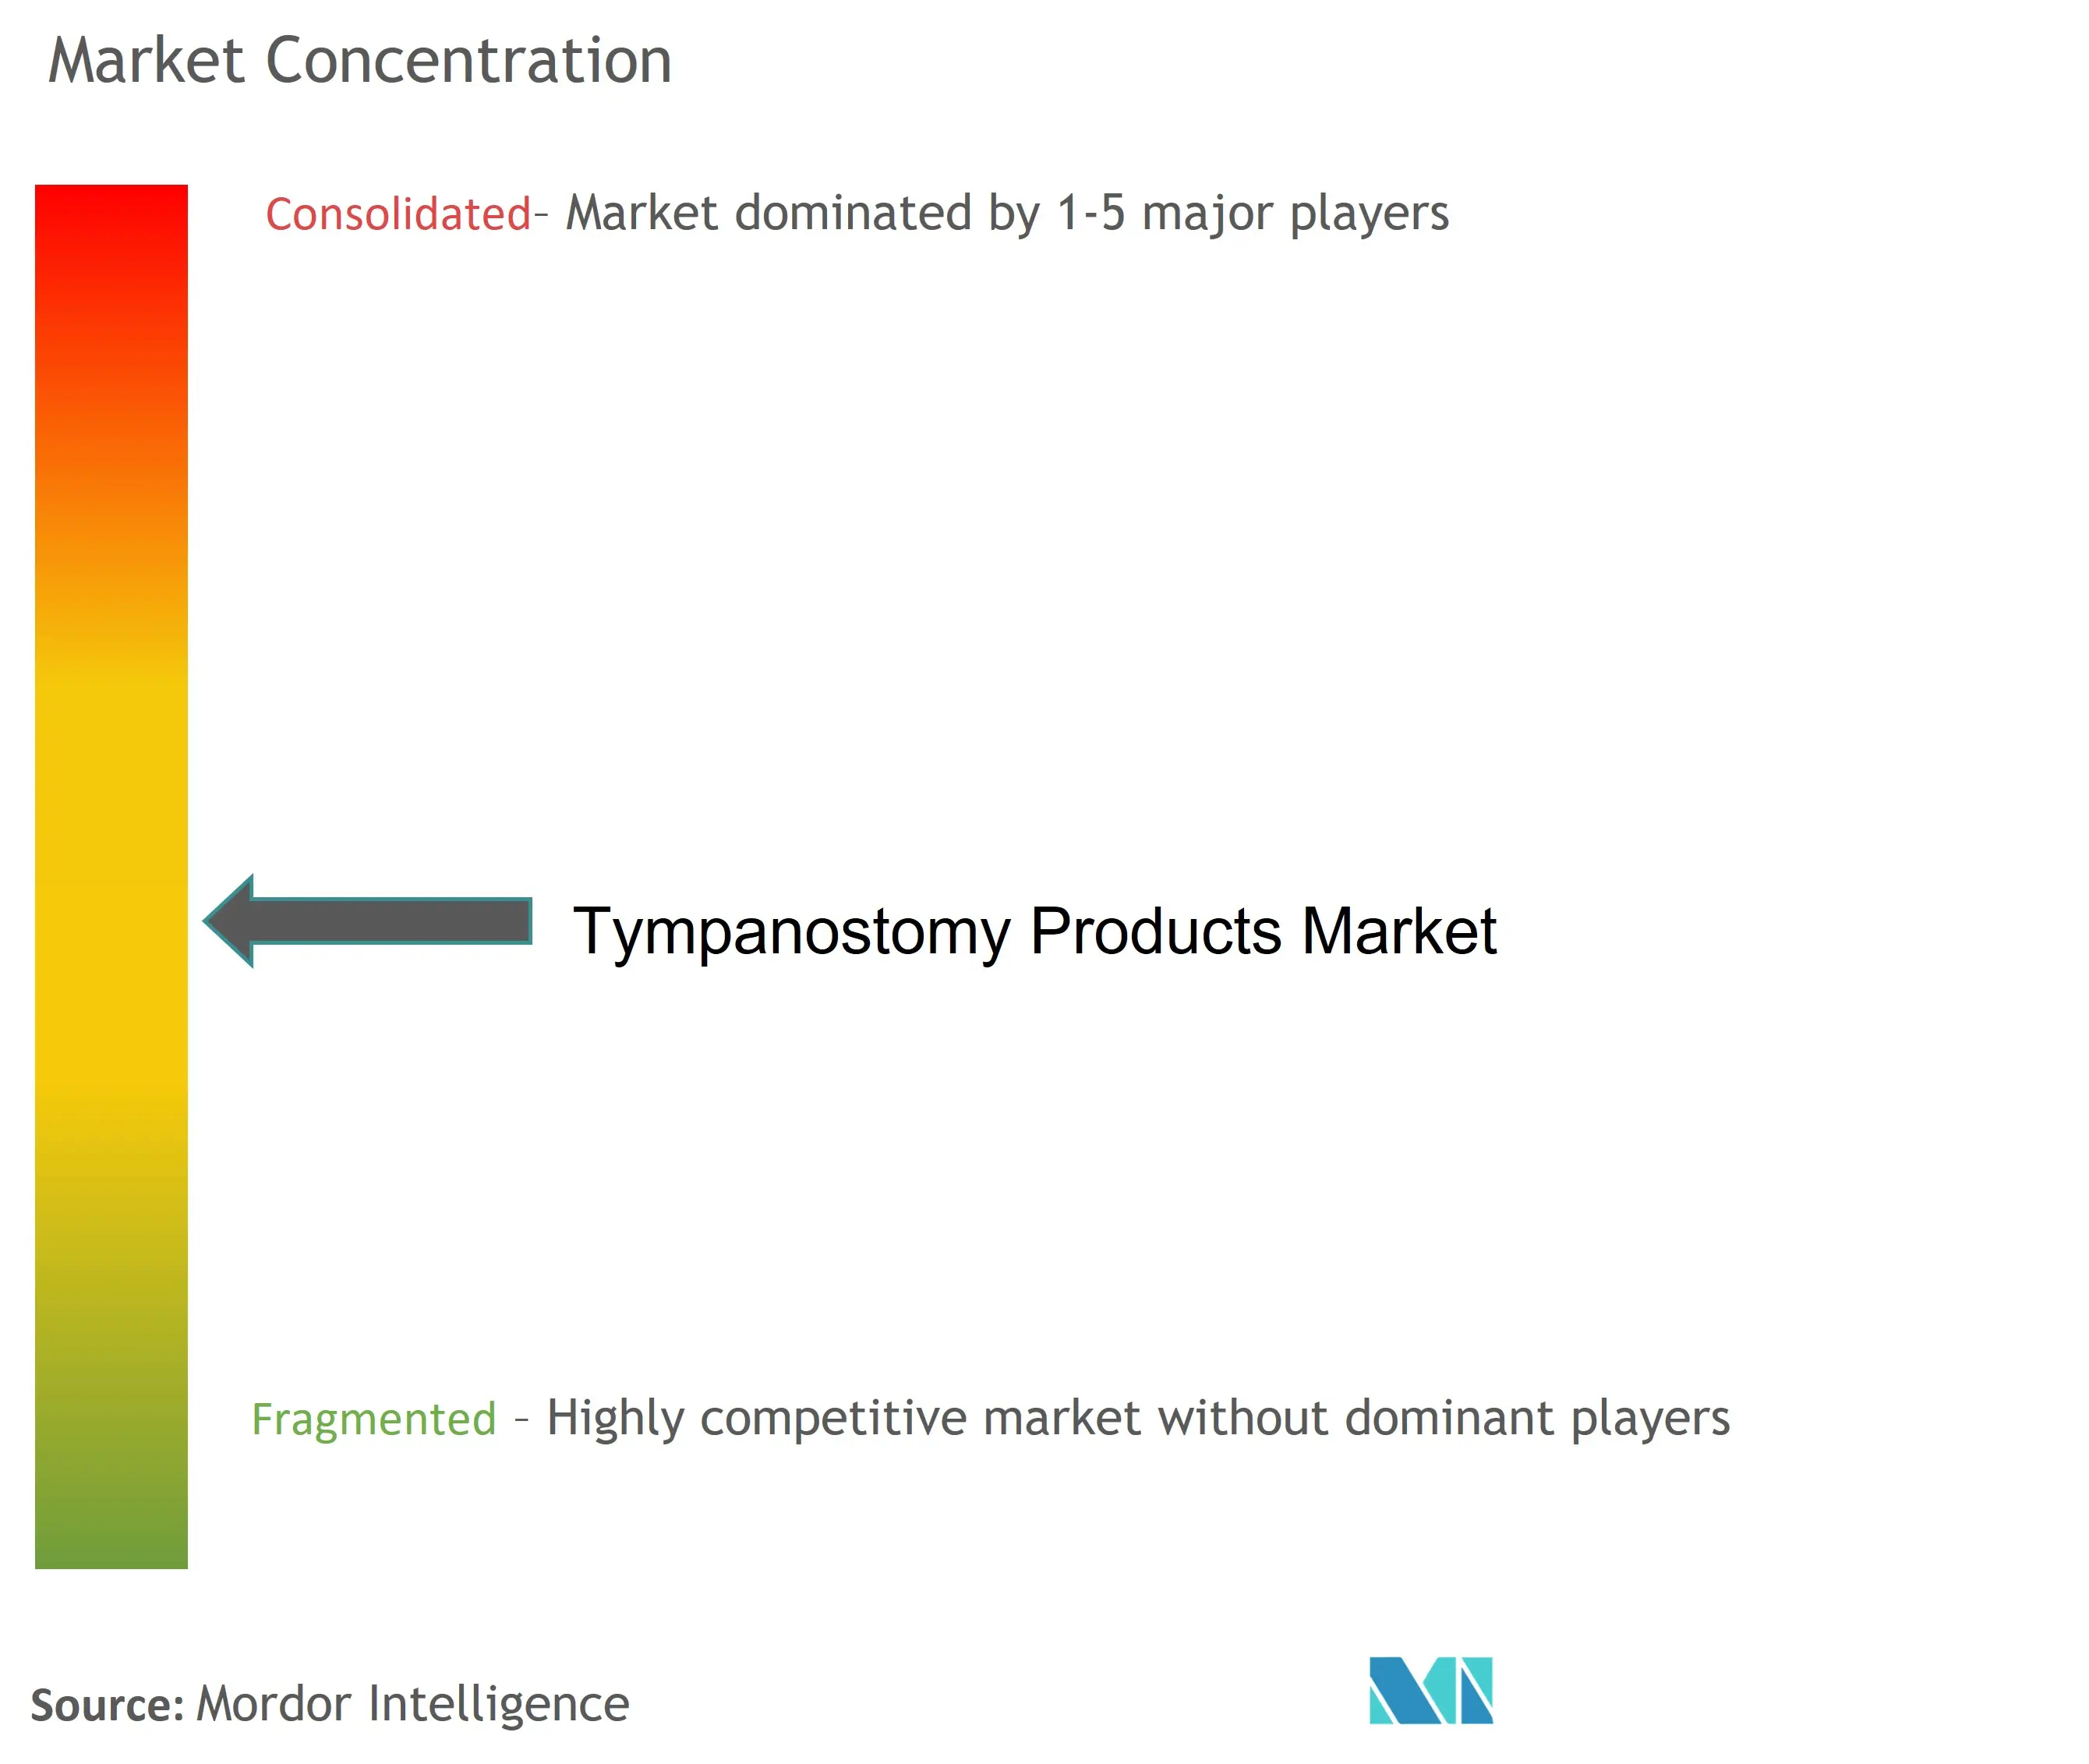 Tympanostomy Products Market Concentration